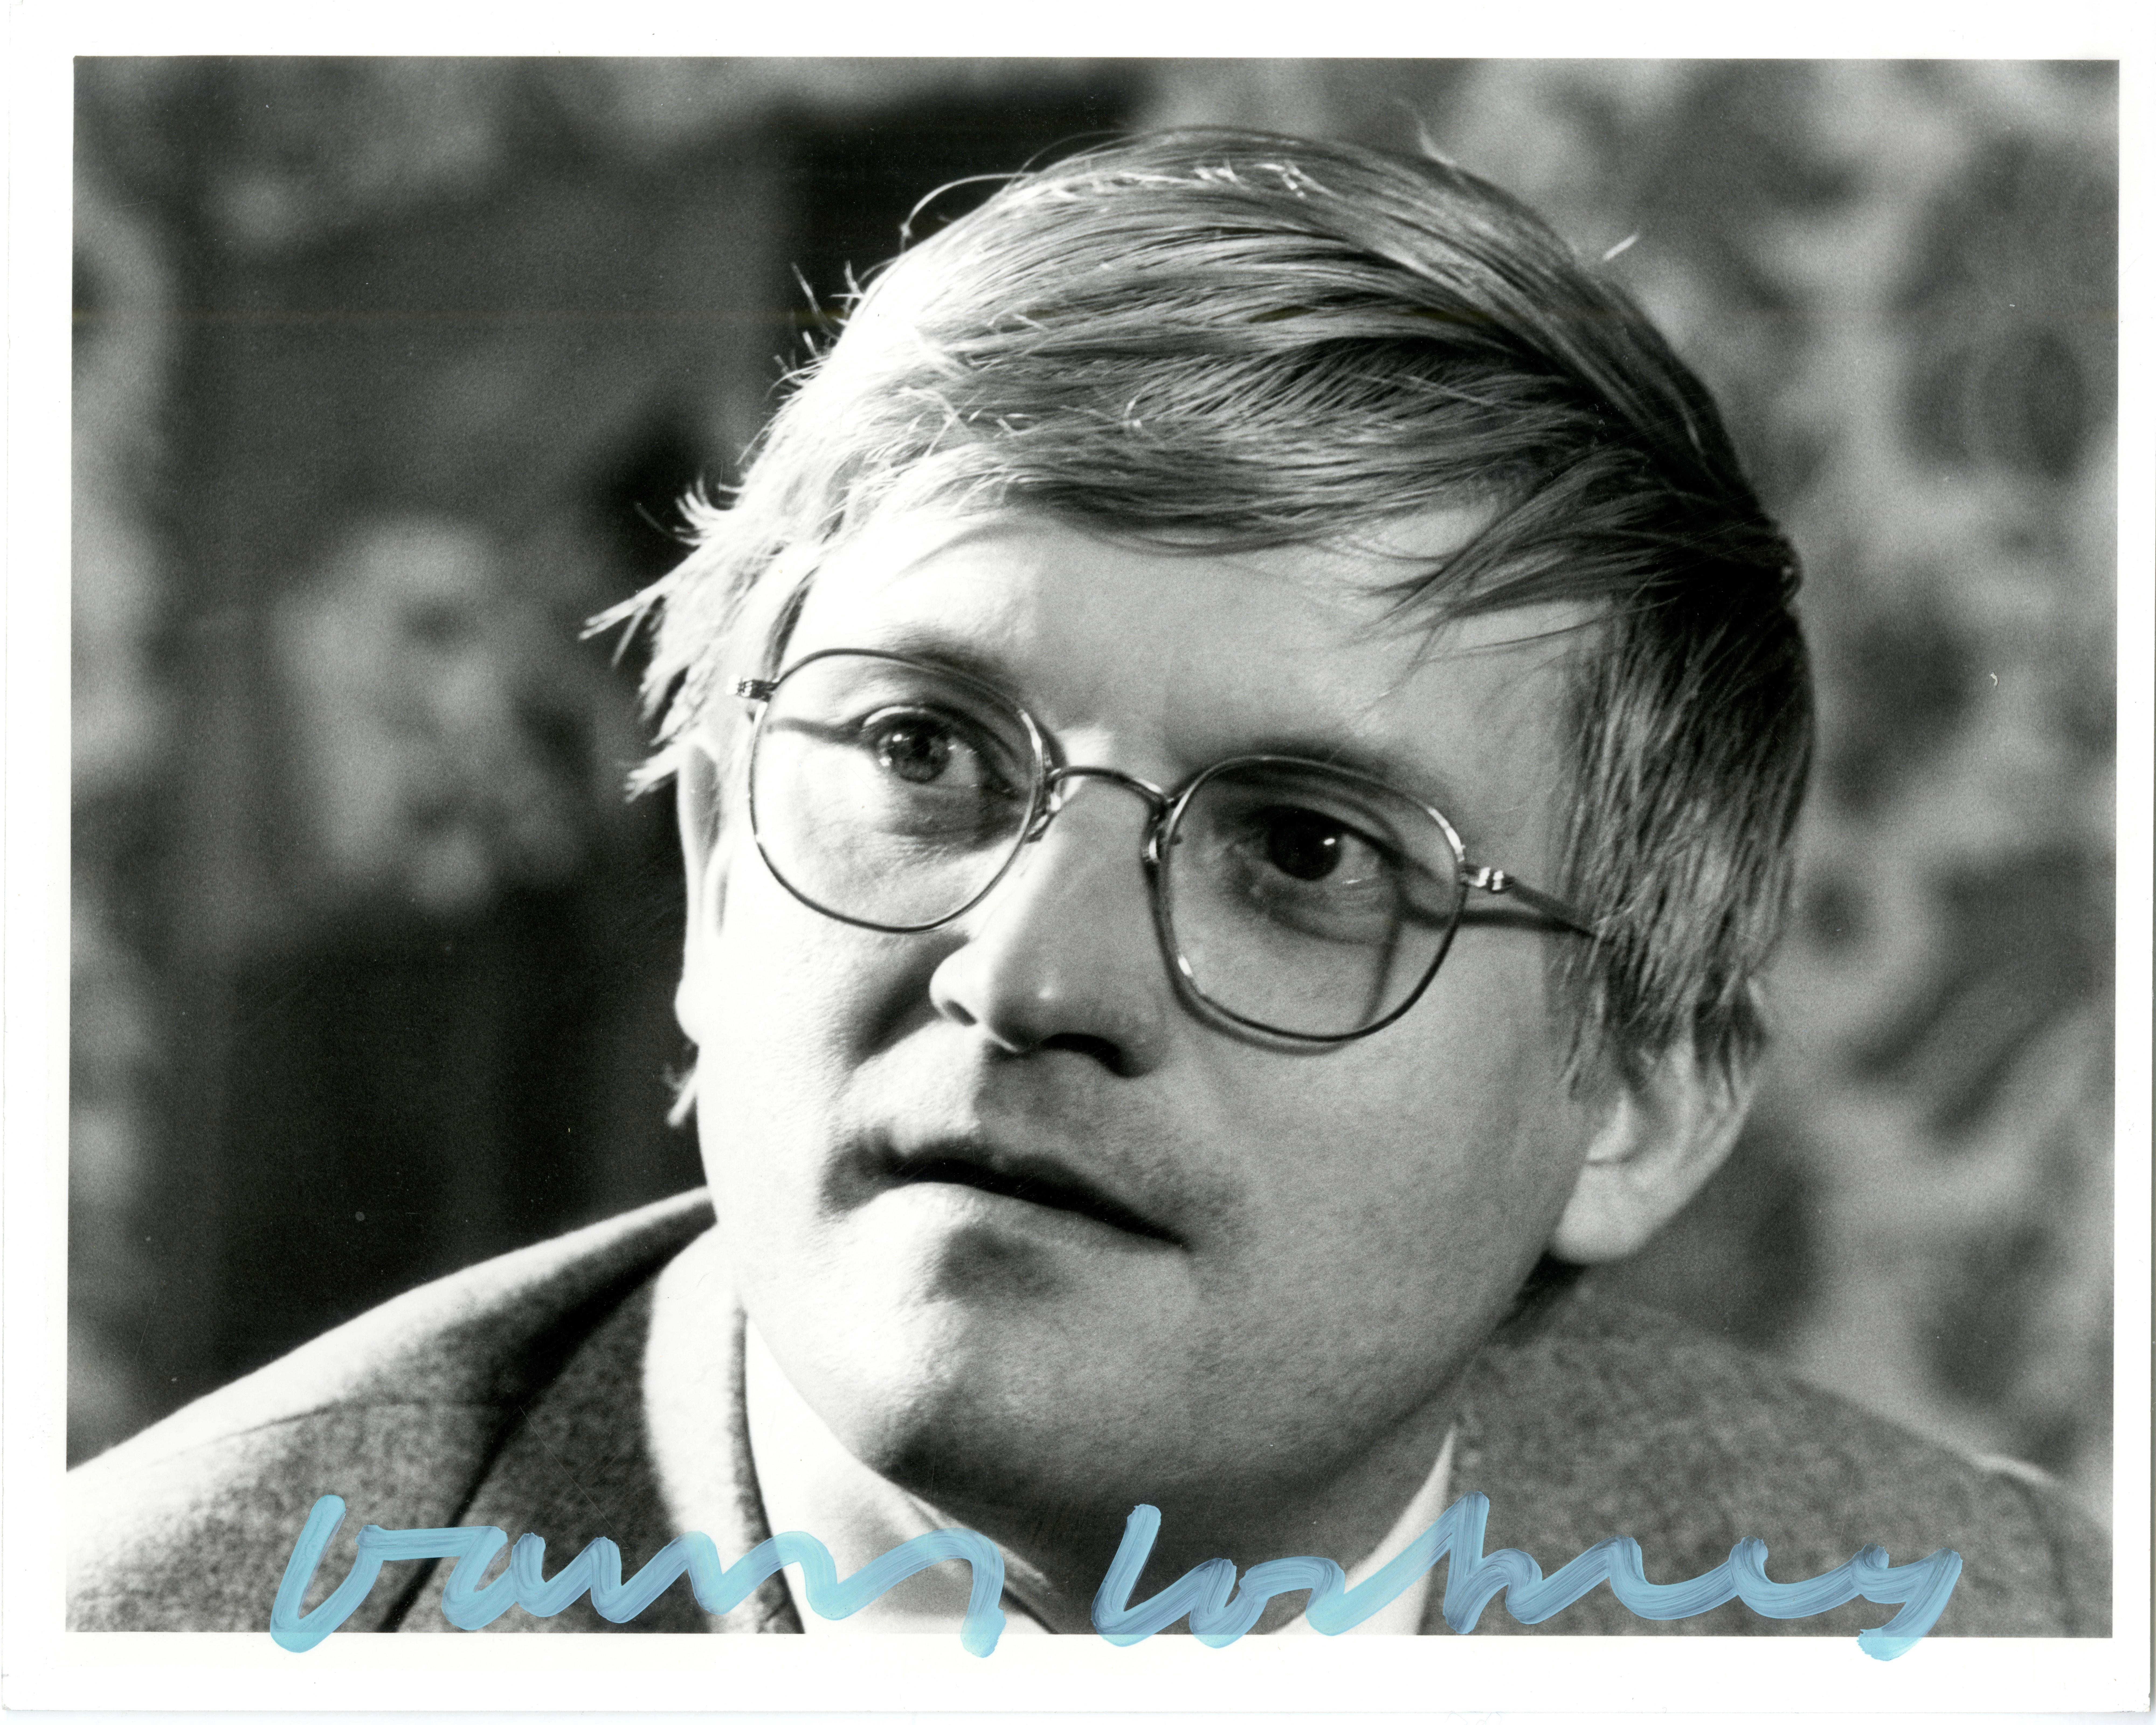 David Hockney
Photograph taken of the artist (hand signed by David Hockney), ca. 1981
Black and white photograph
Boldly signed in blue grease marker on the lower front
8 × 10 inches
Unframed
This is an 8 x 10 photograph of the artist that he has